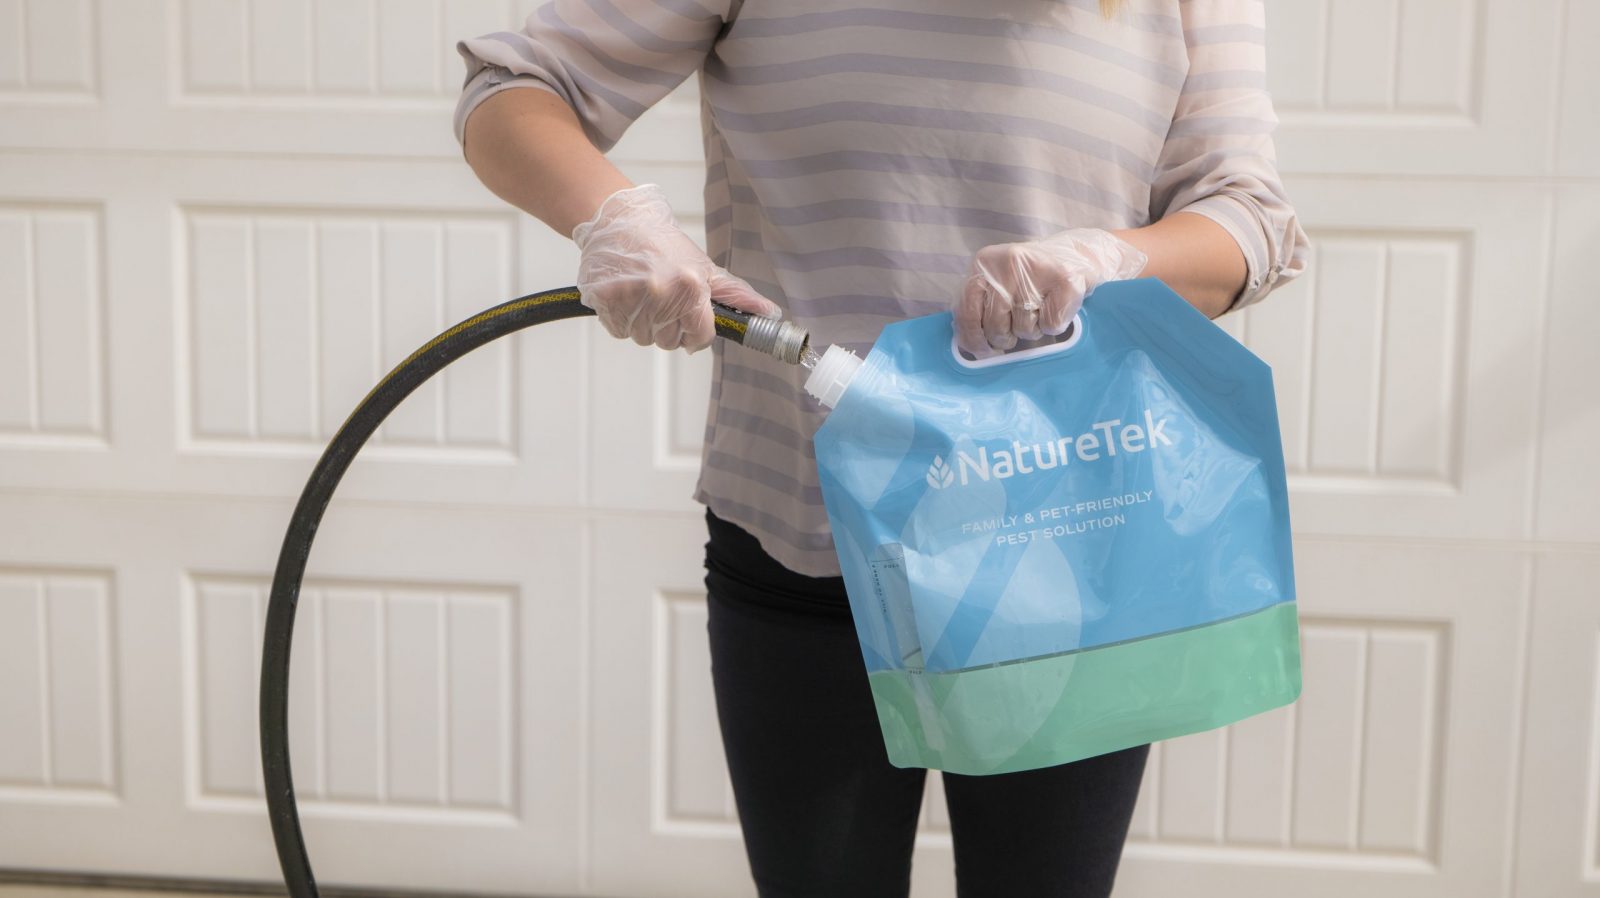 Why NatureTek’s DIY Pest Control Kits are the Better Option for Your Home or Business